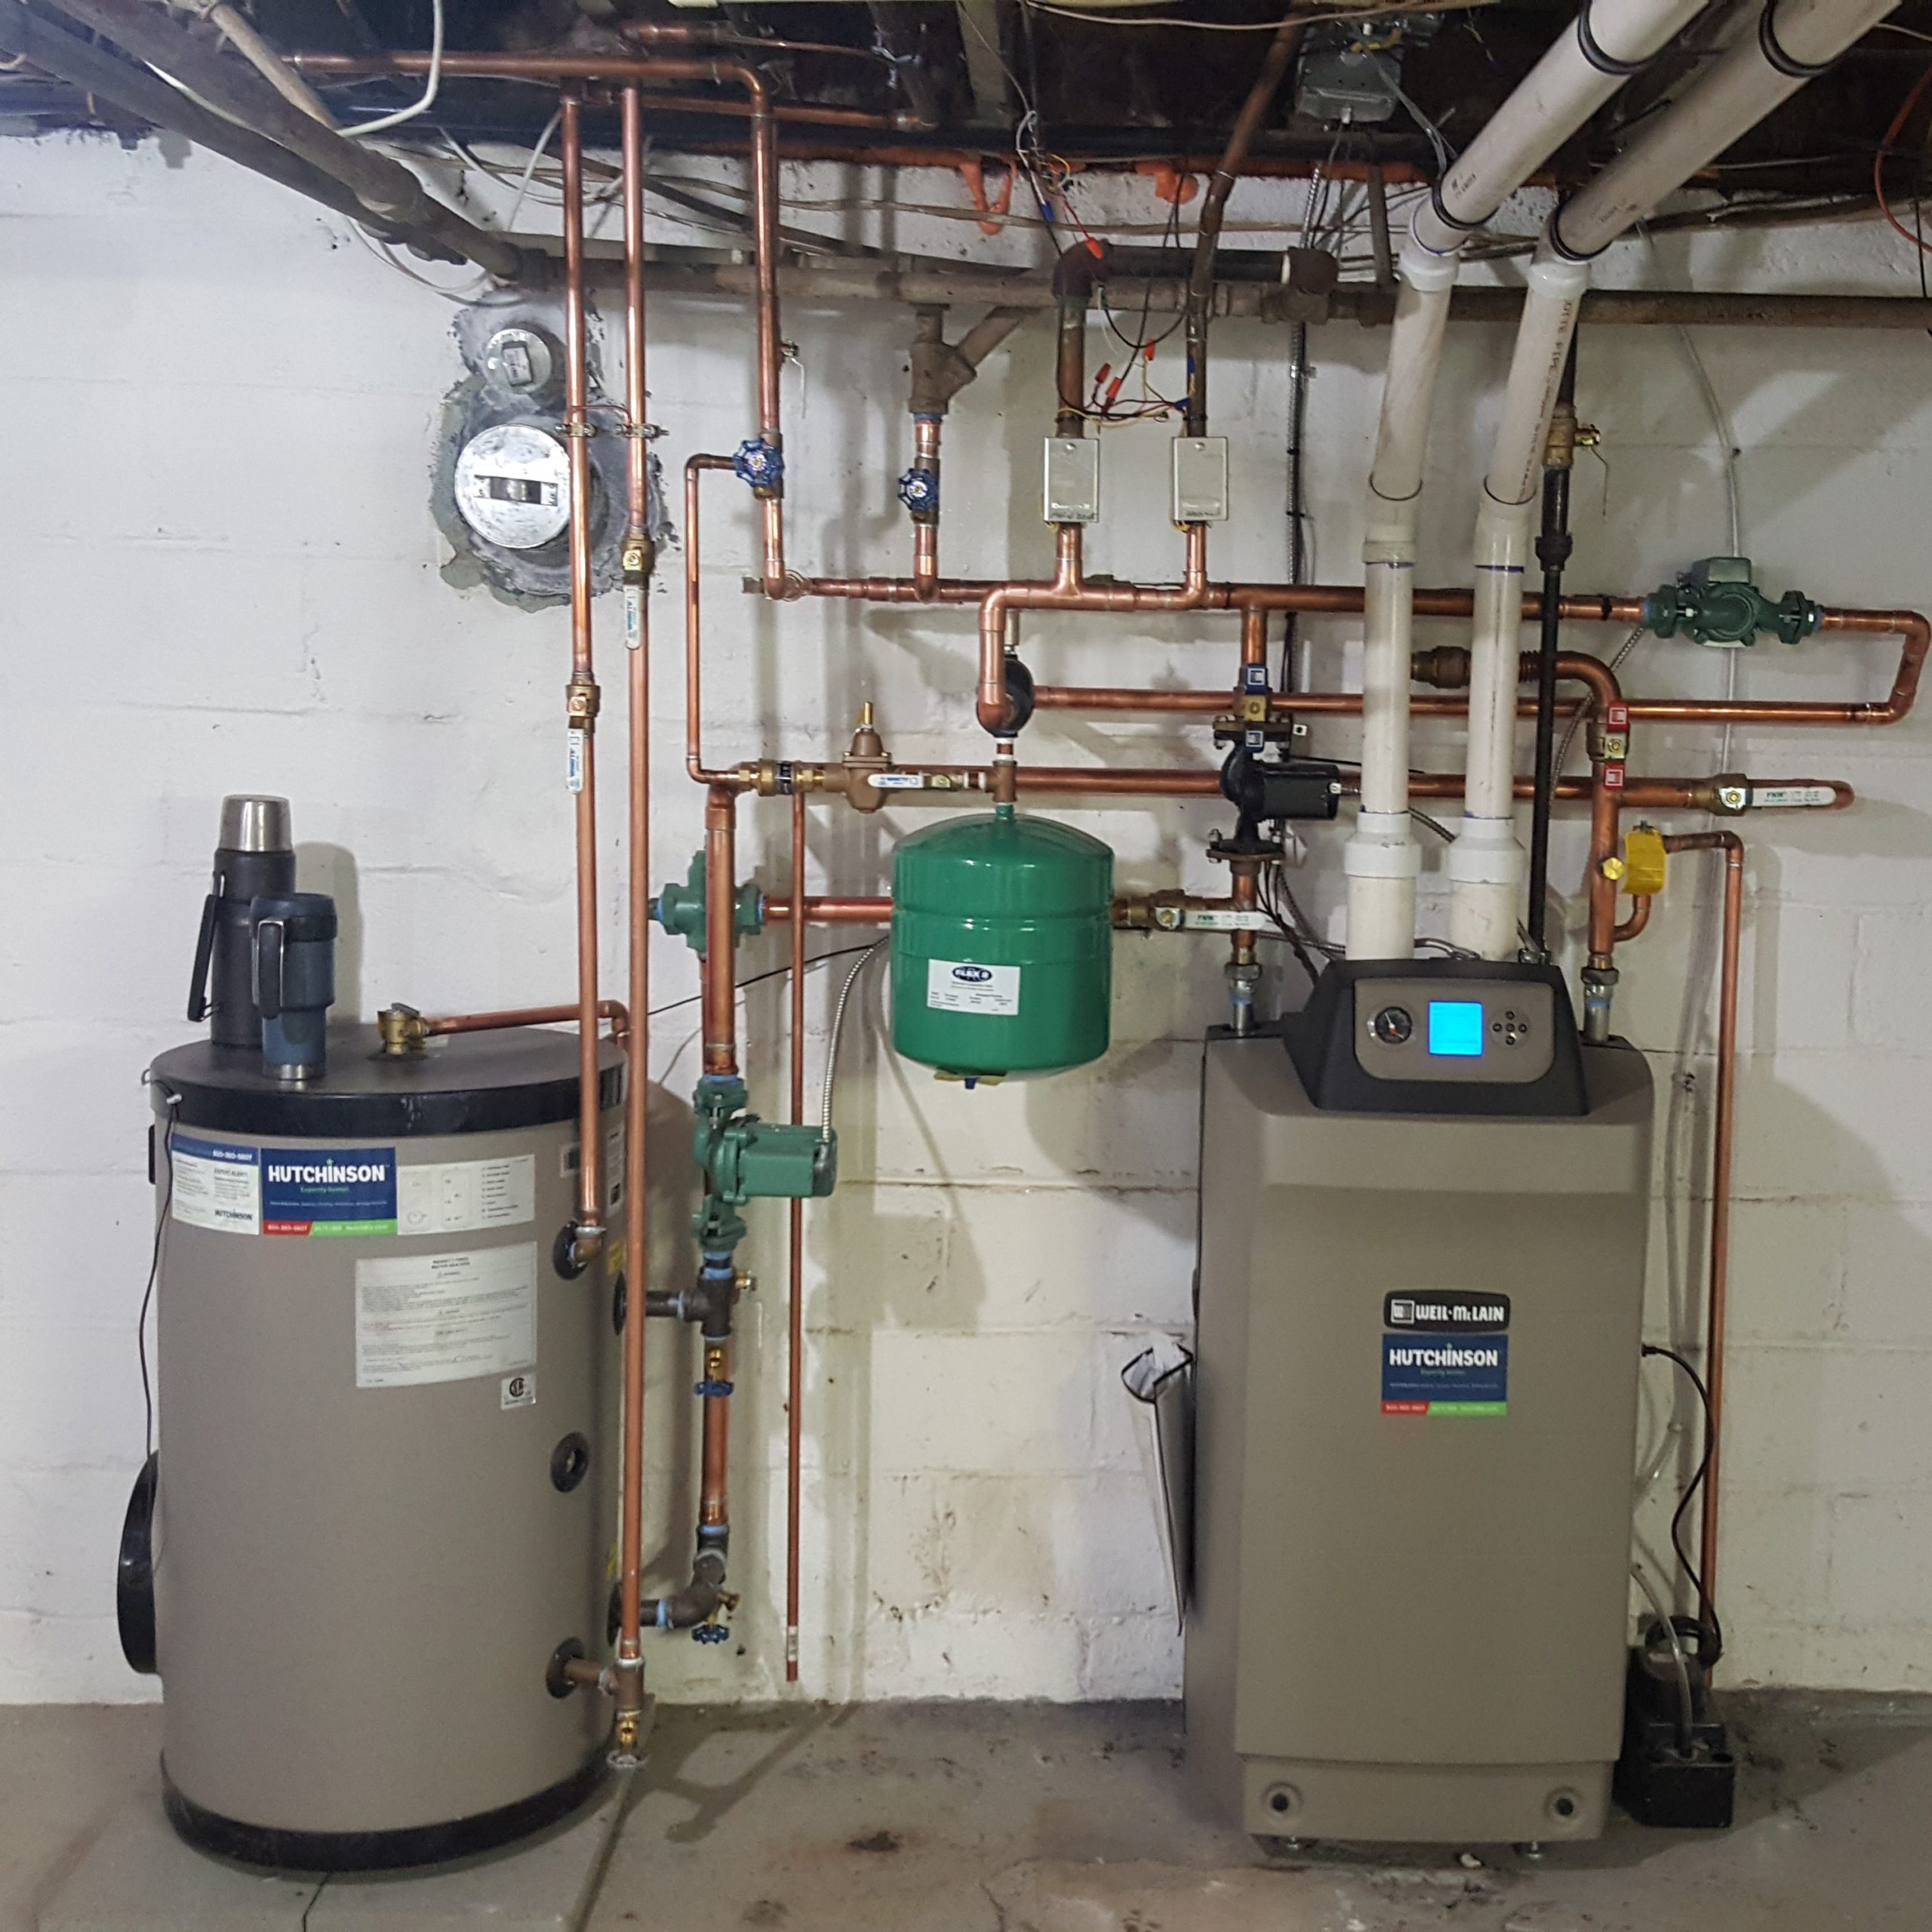 Plumbing, Heating and Air Conditioning Services in Wildwood, NJ